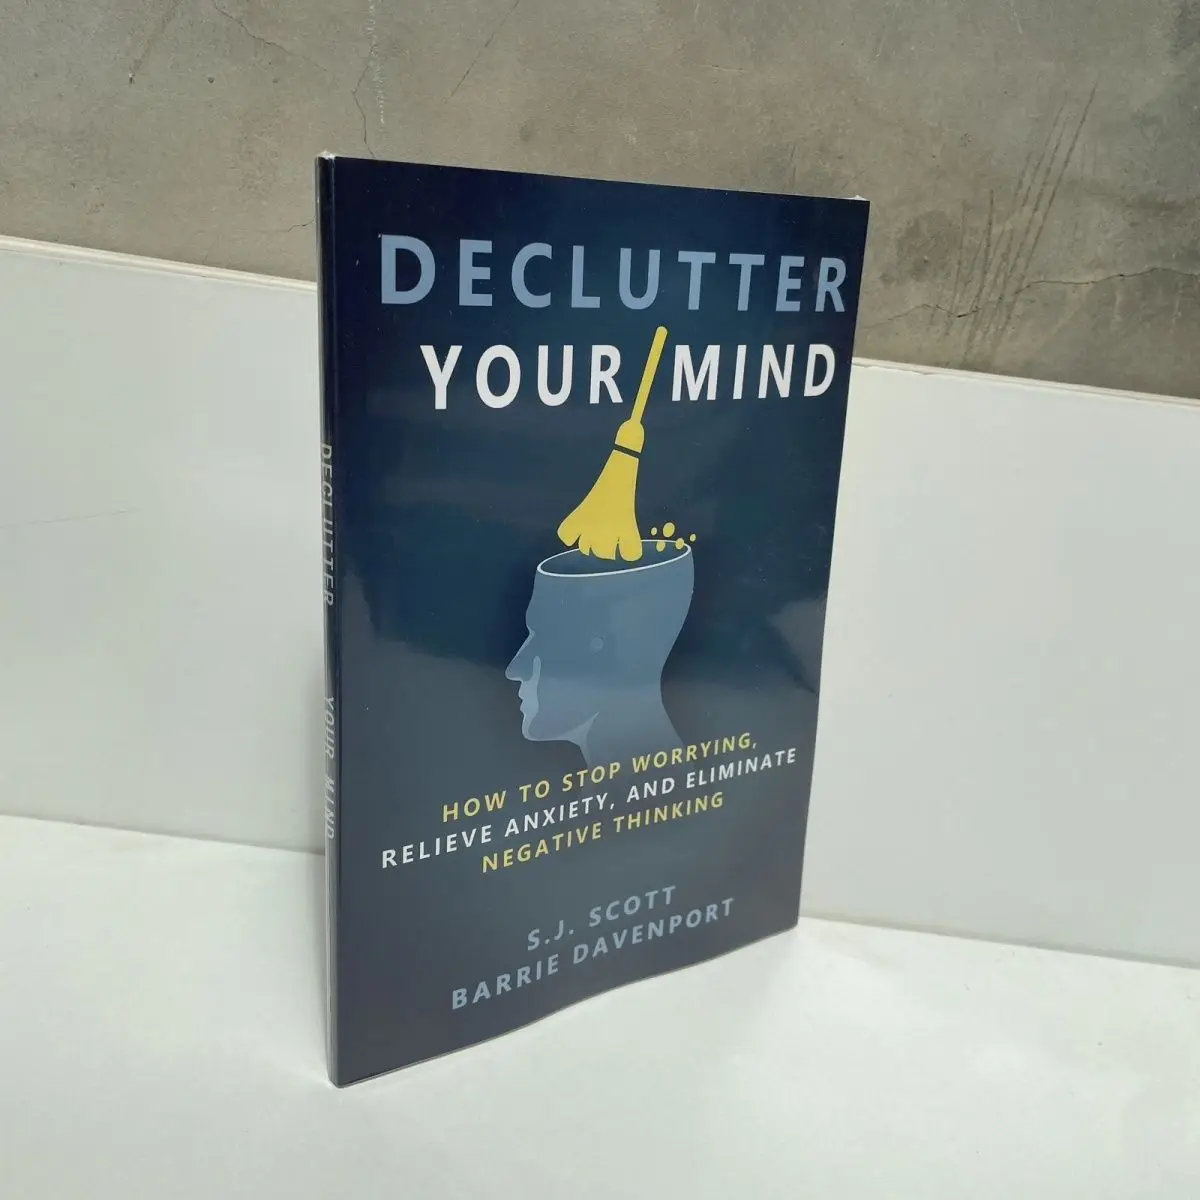 

Declutter Your Mind How to Stop Worrying, Relieve Anxiety and Eliminate Negative Thinking Book Paperback